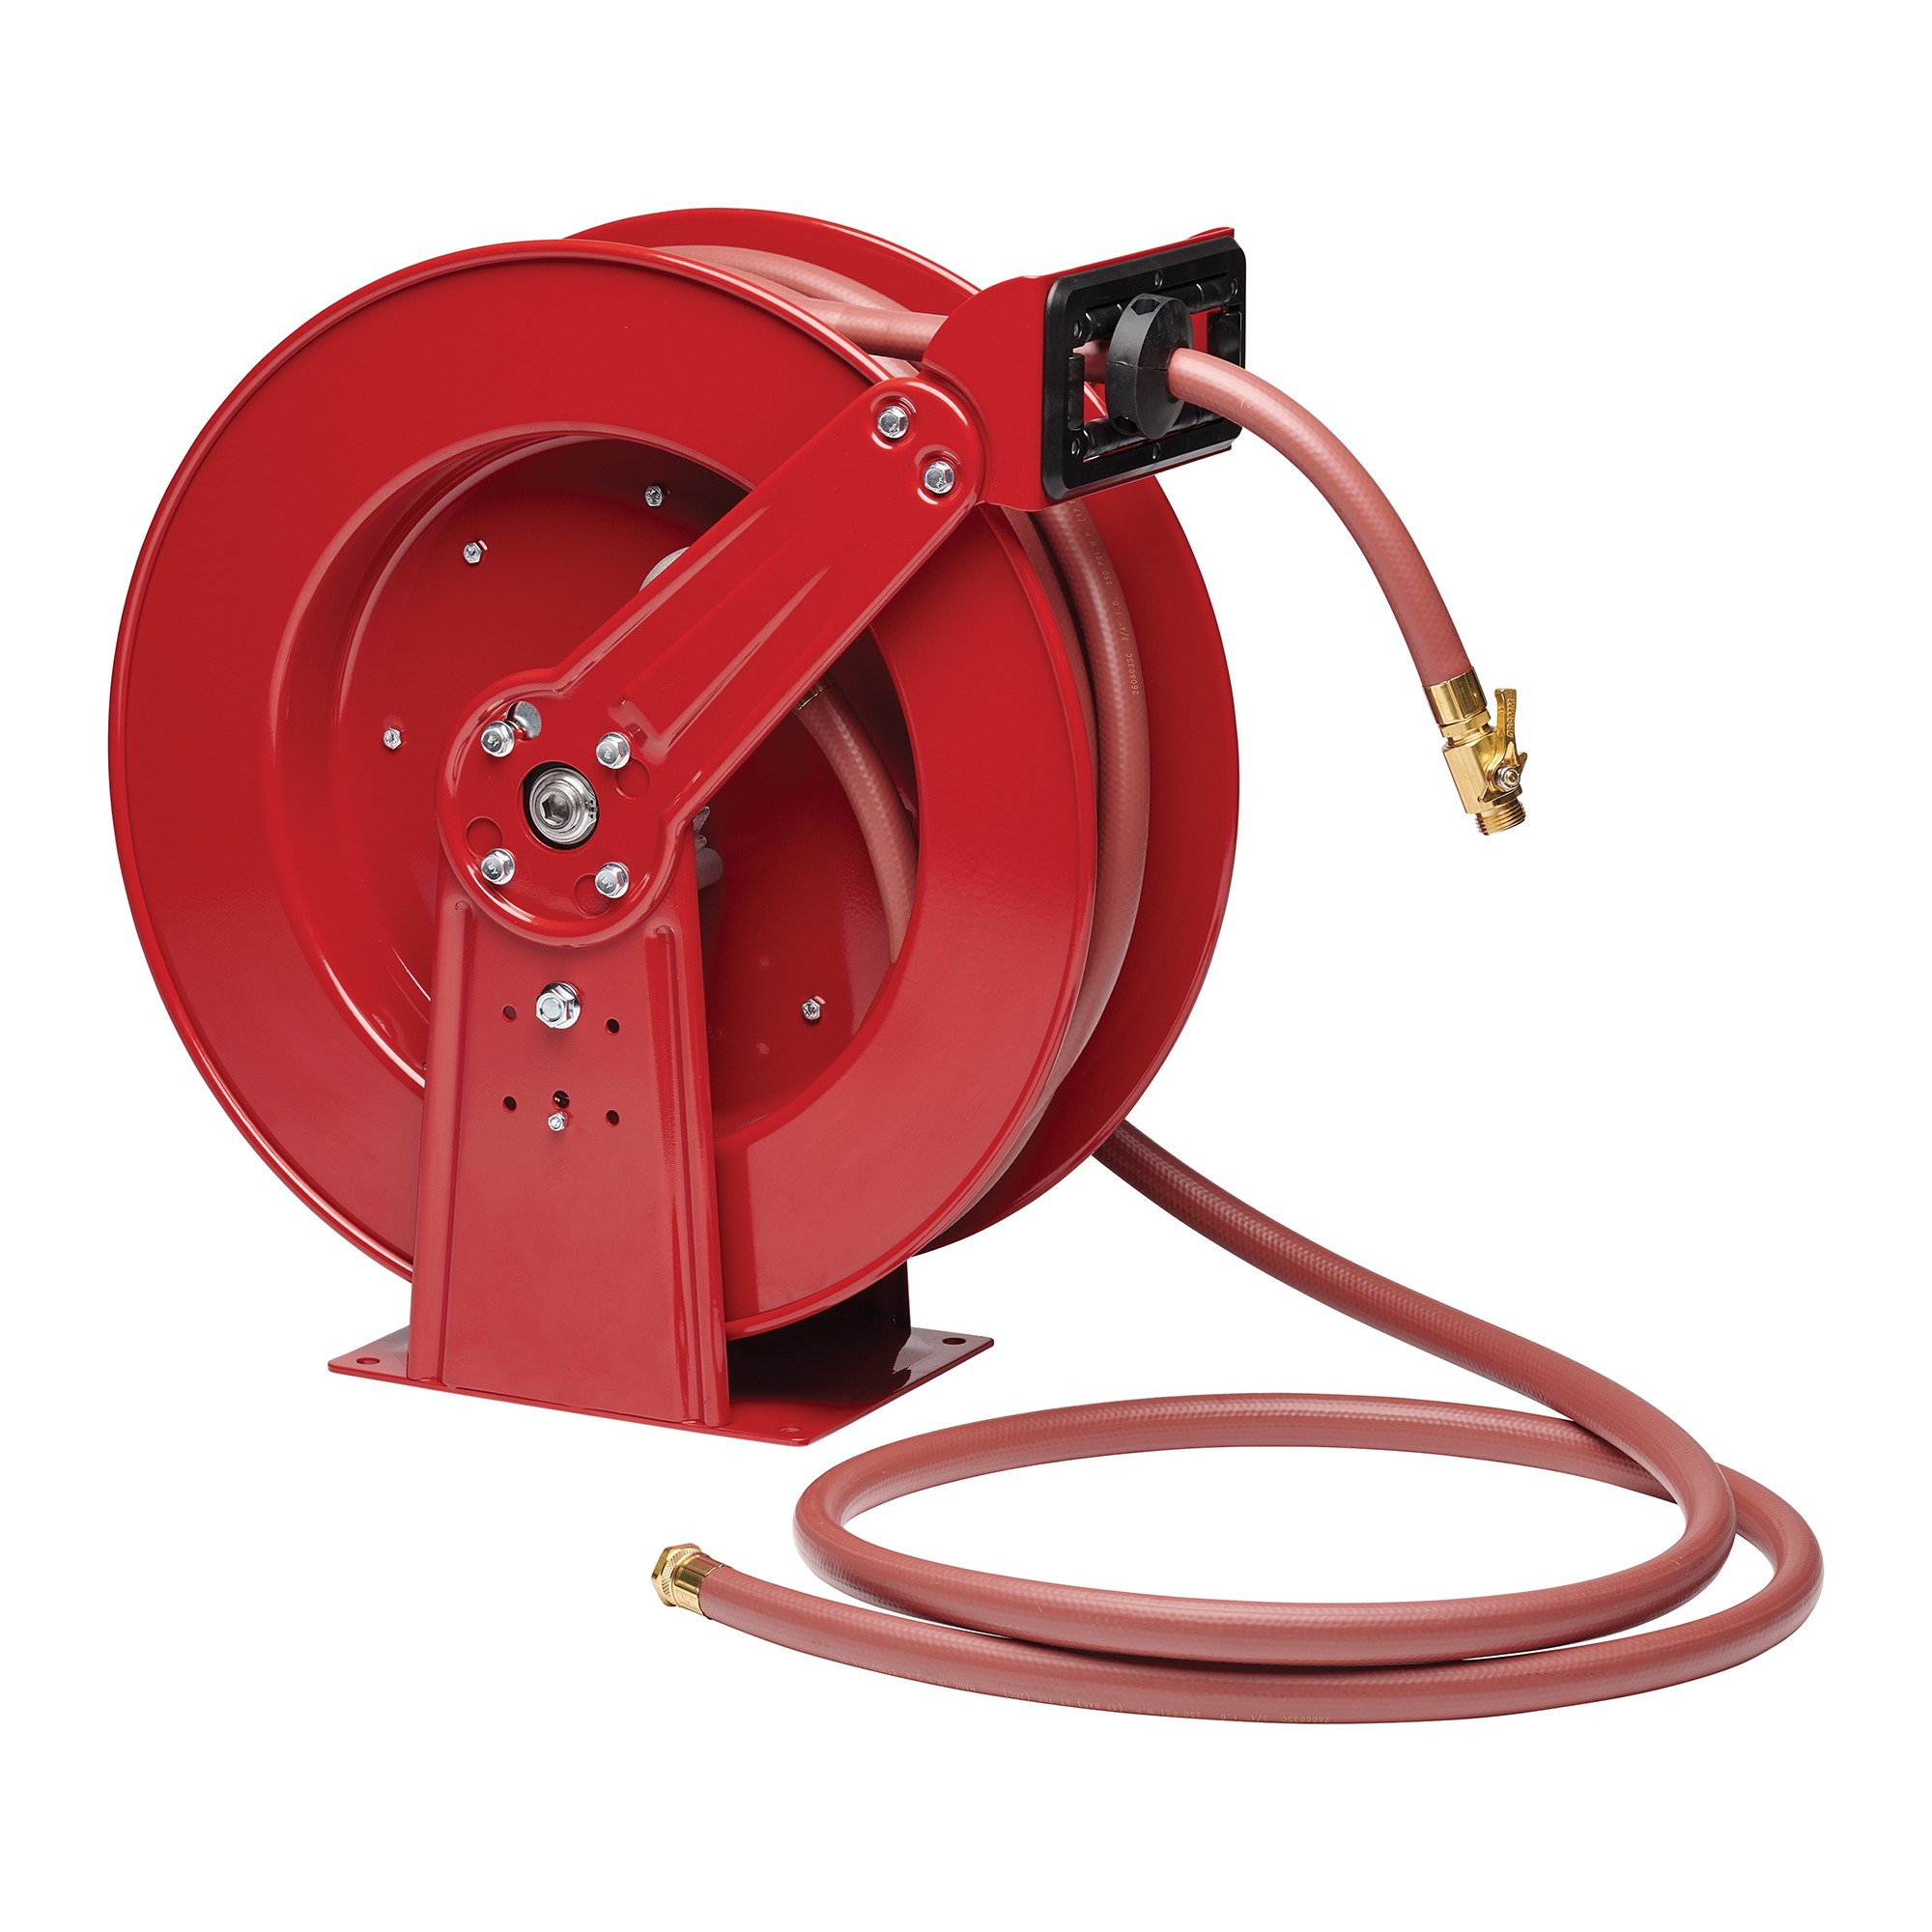 Reelcraft Dual Pedestal Fuel Hose Reels - Reel with 3/4 in. x 75 ft. BC  Marina Hose